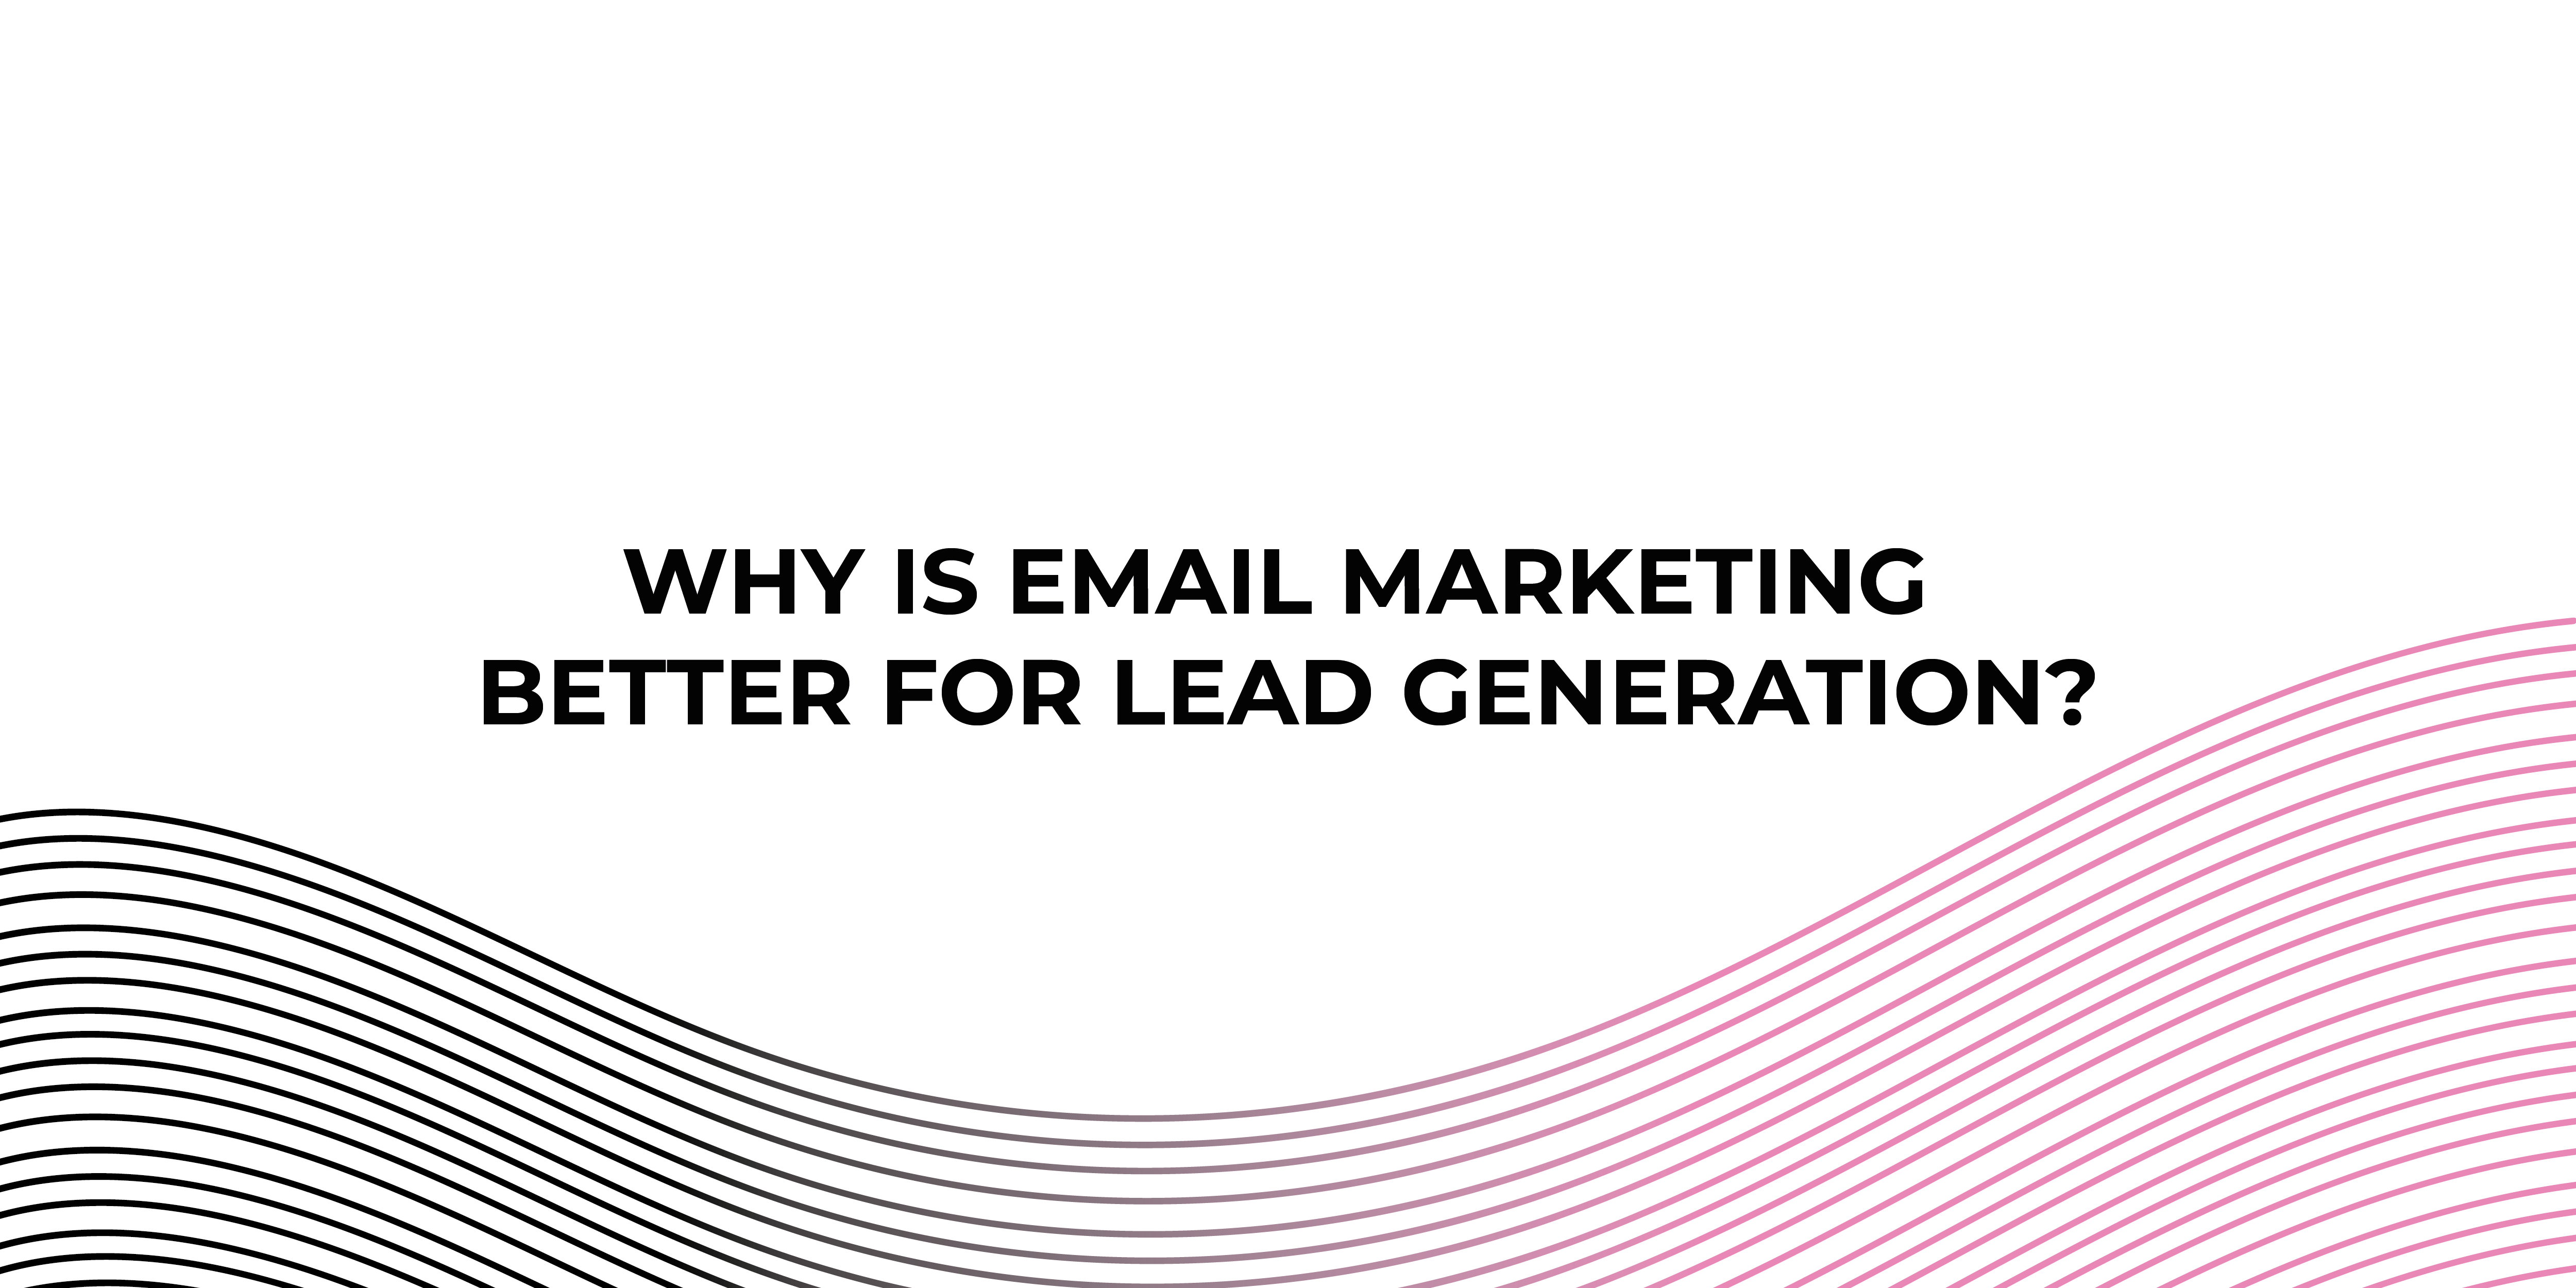 Why Is Email Marketing Better for Lead Generation?